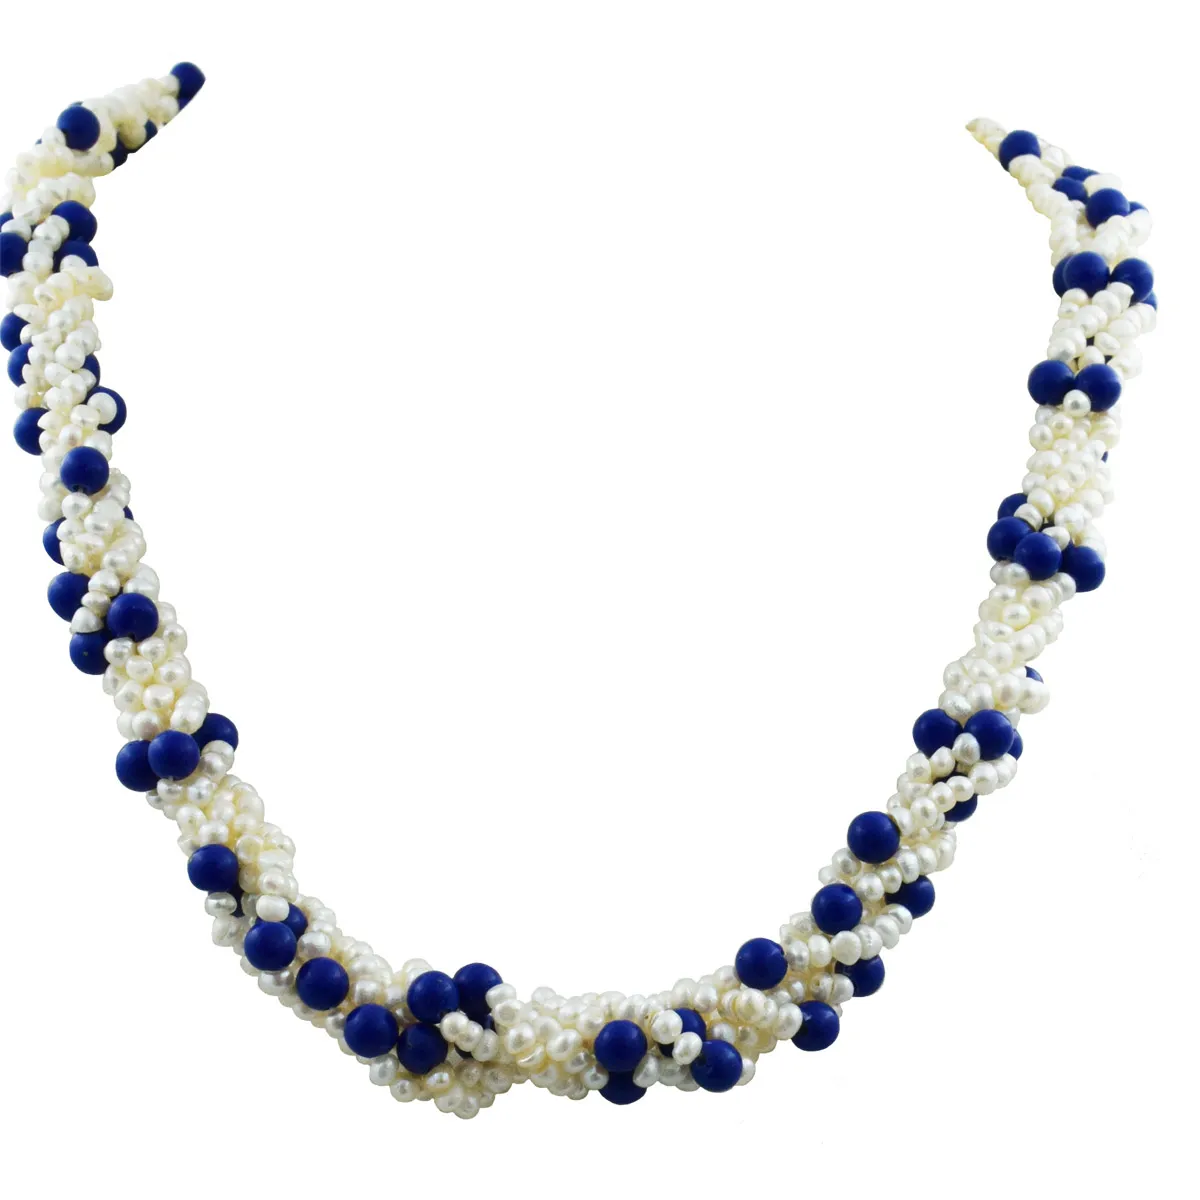 5 Line Twisted Real Pearl & Blue Lapiz Beads Necklace for Women (SN1055)